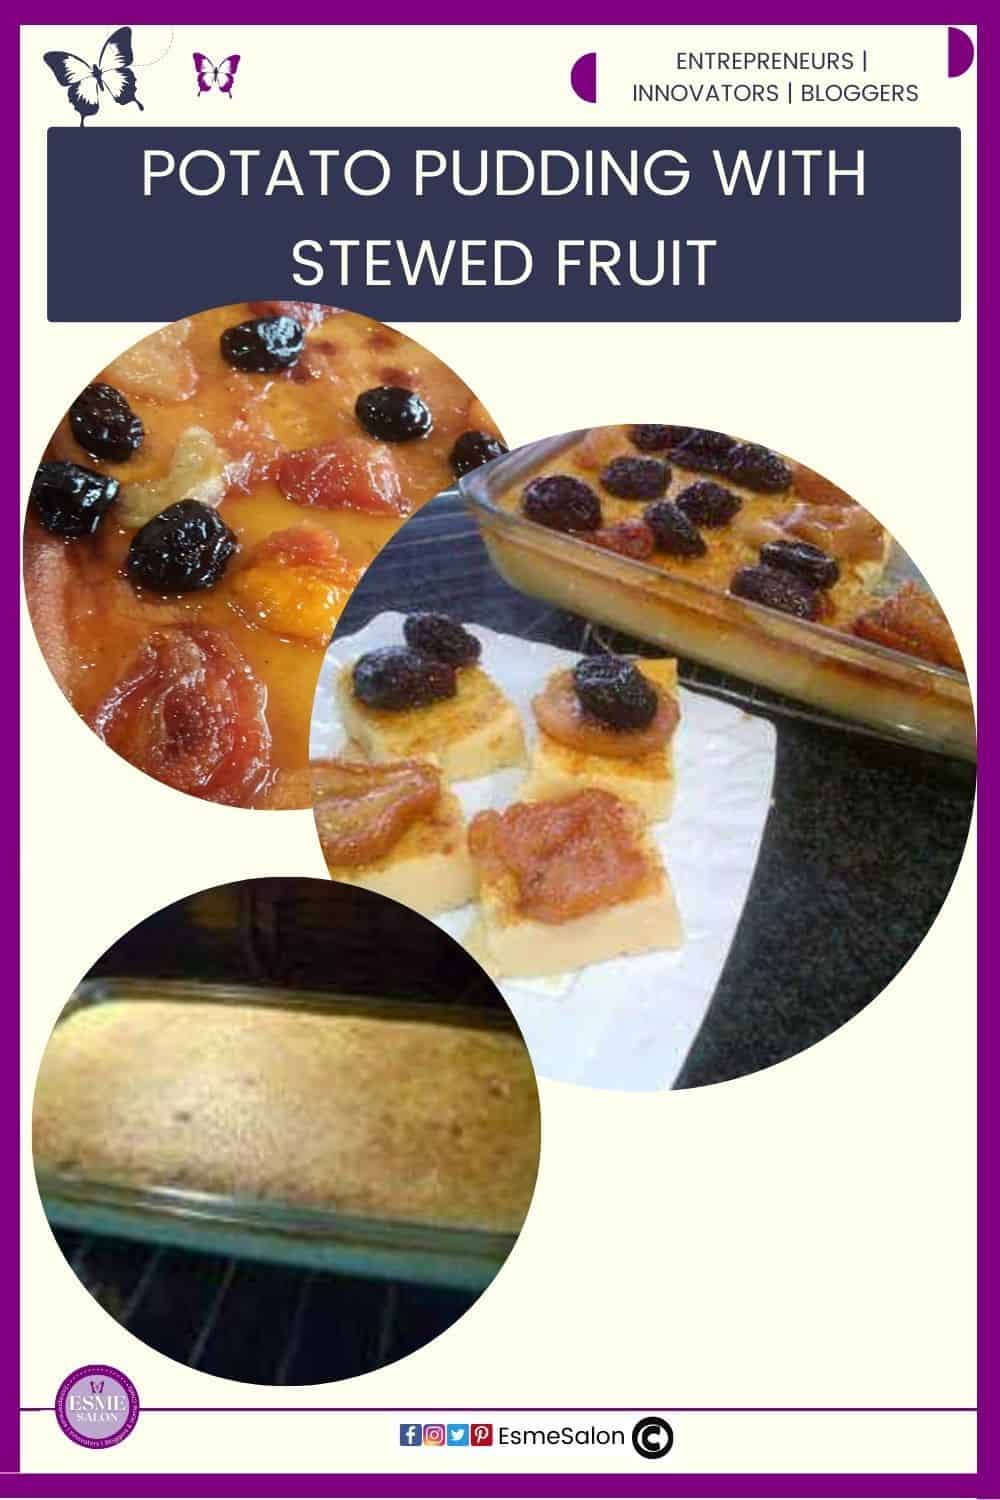 an image of a Potato Pudding and topped with Stewed Fruit